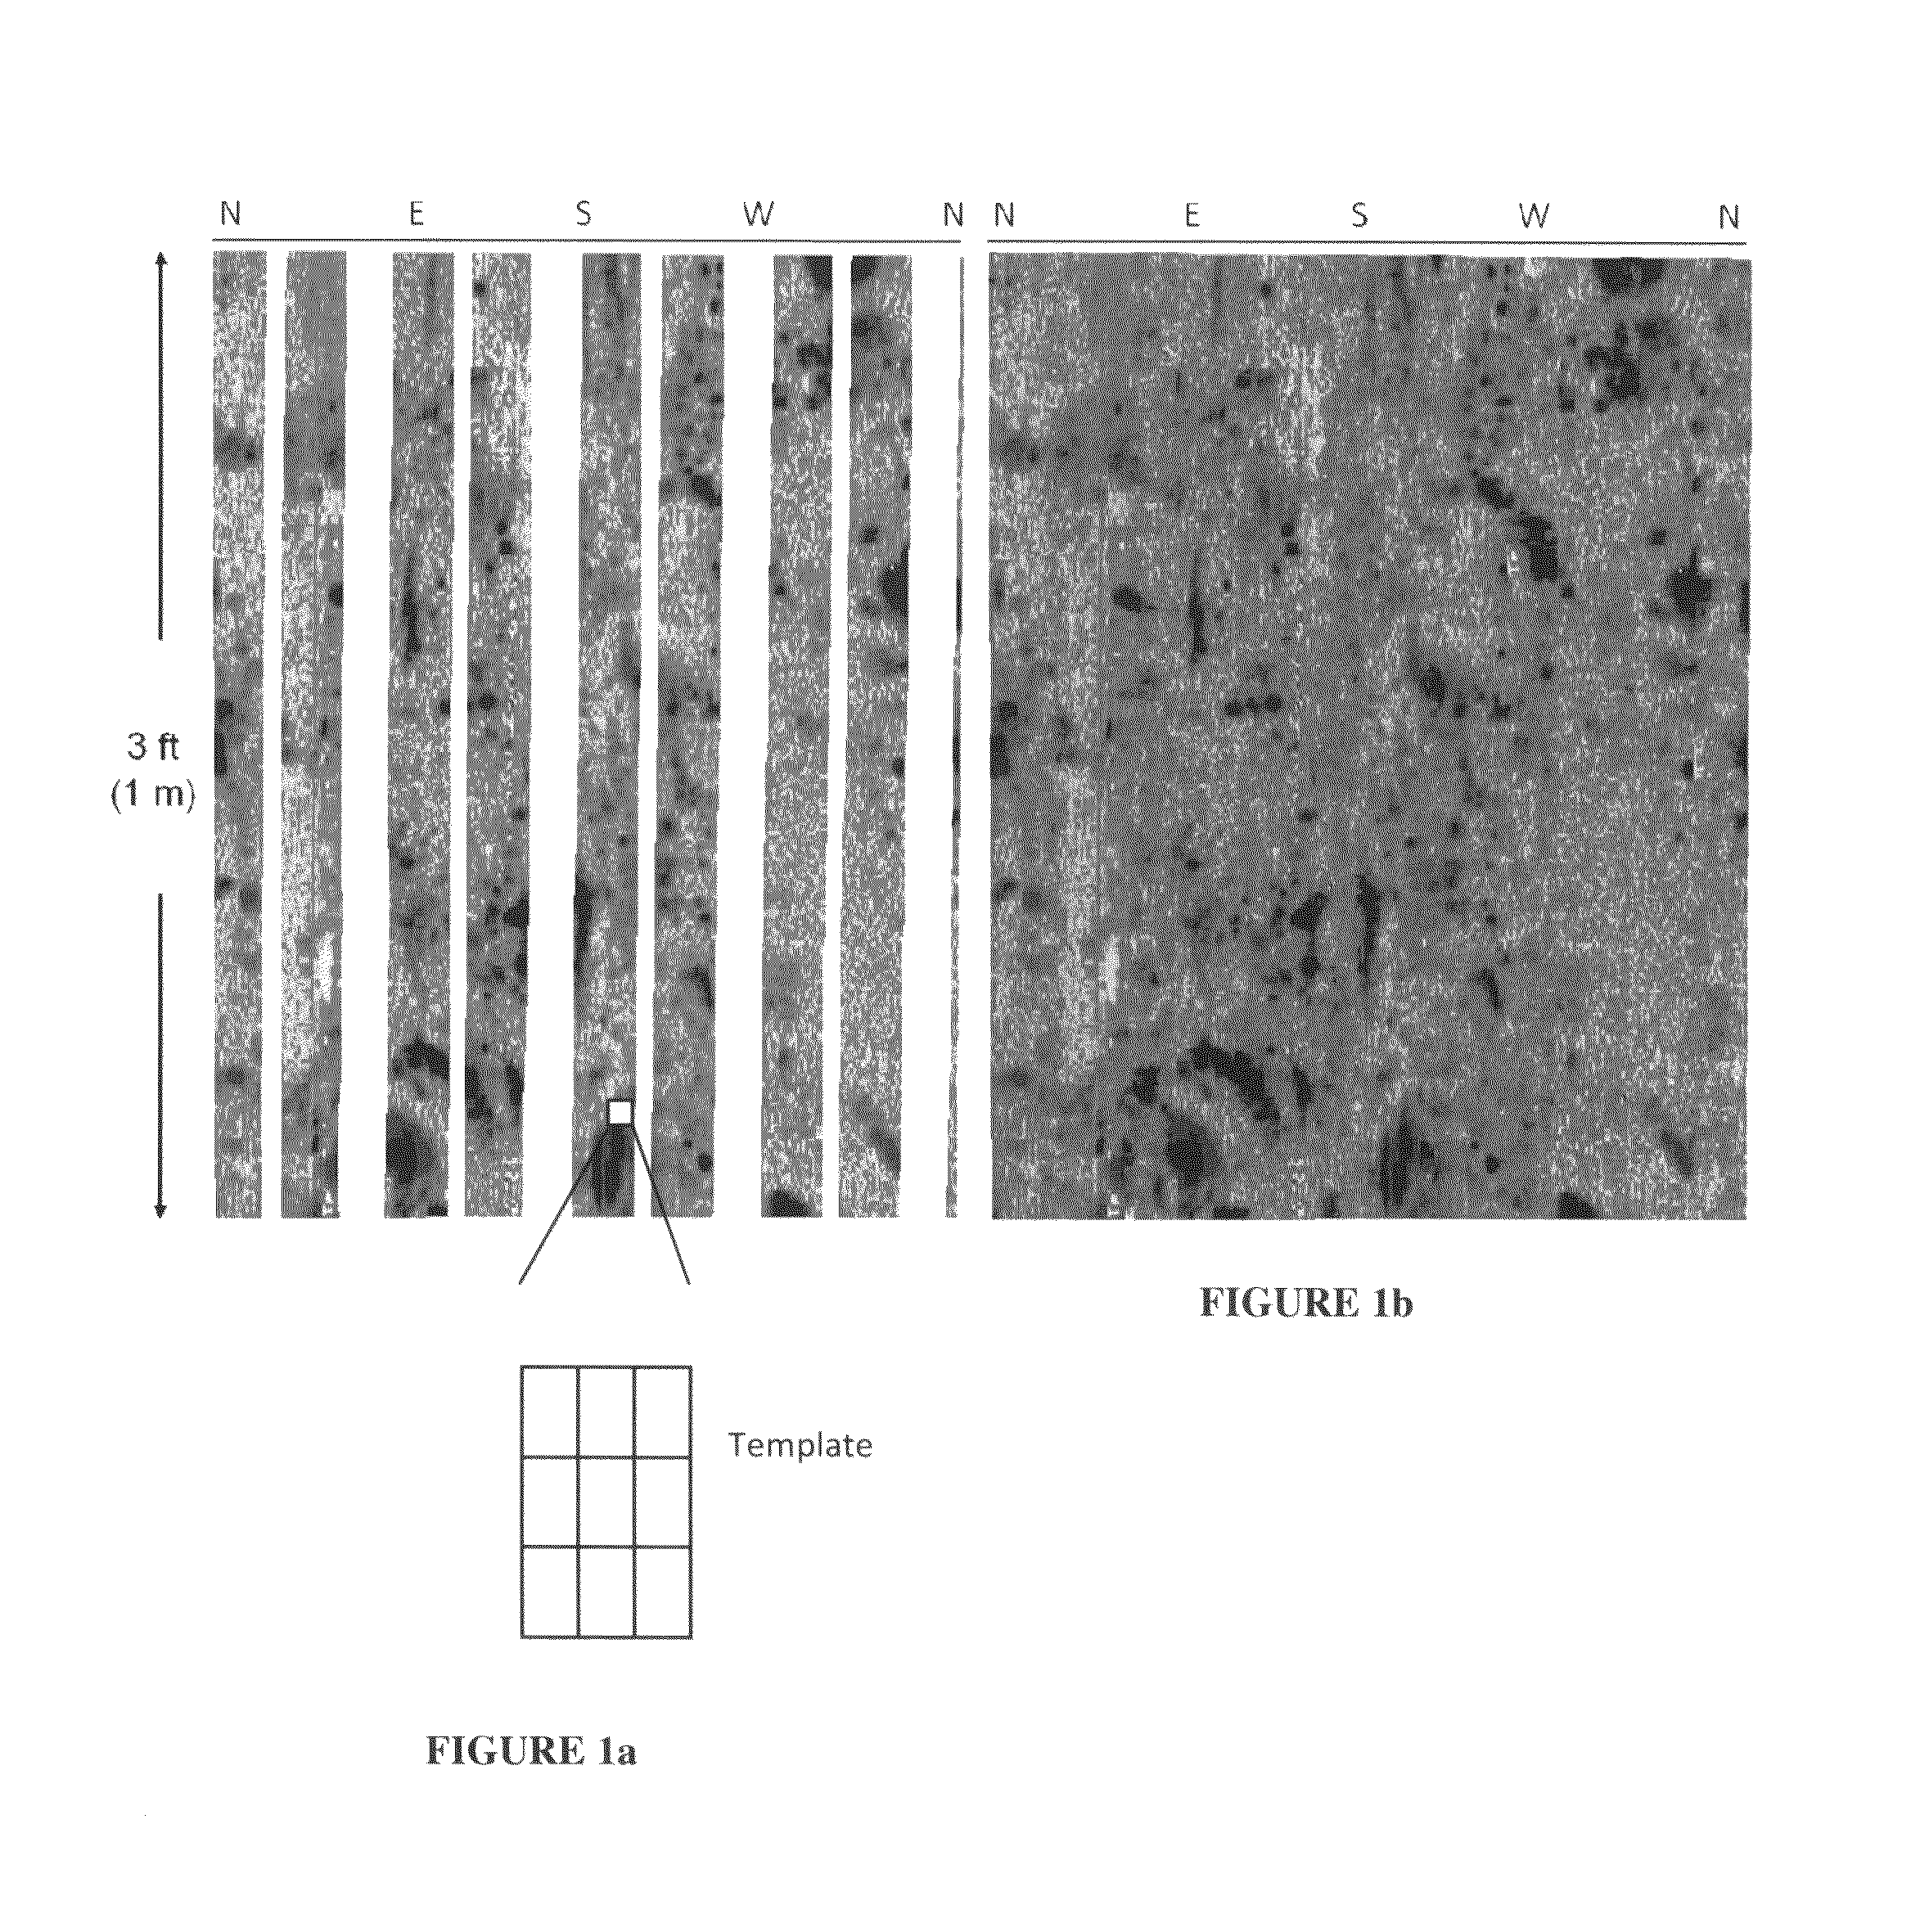 Method to generate numerical pseudocores using borehole images, digital rock samples, and multi-point statistics